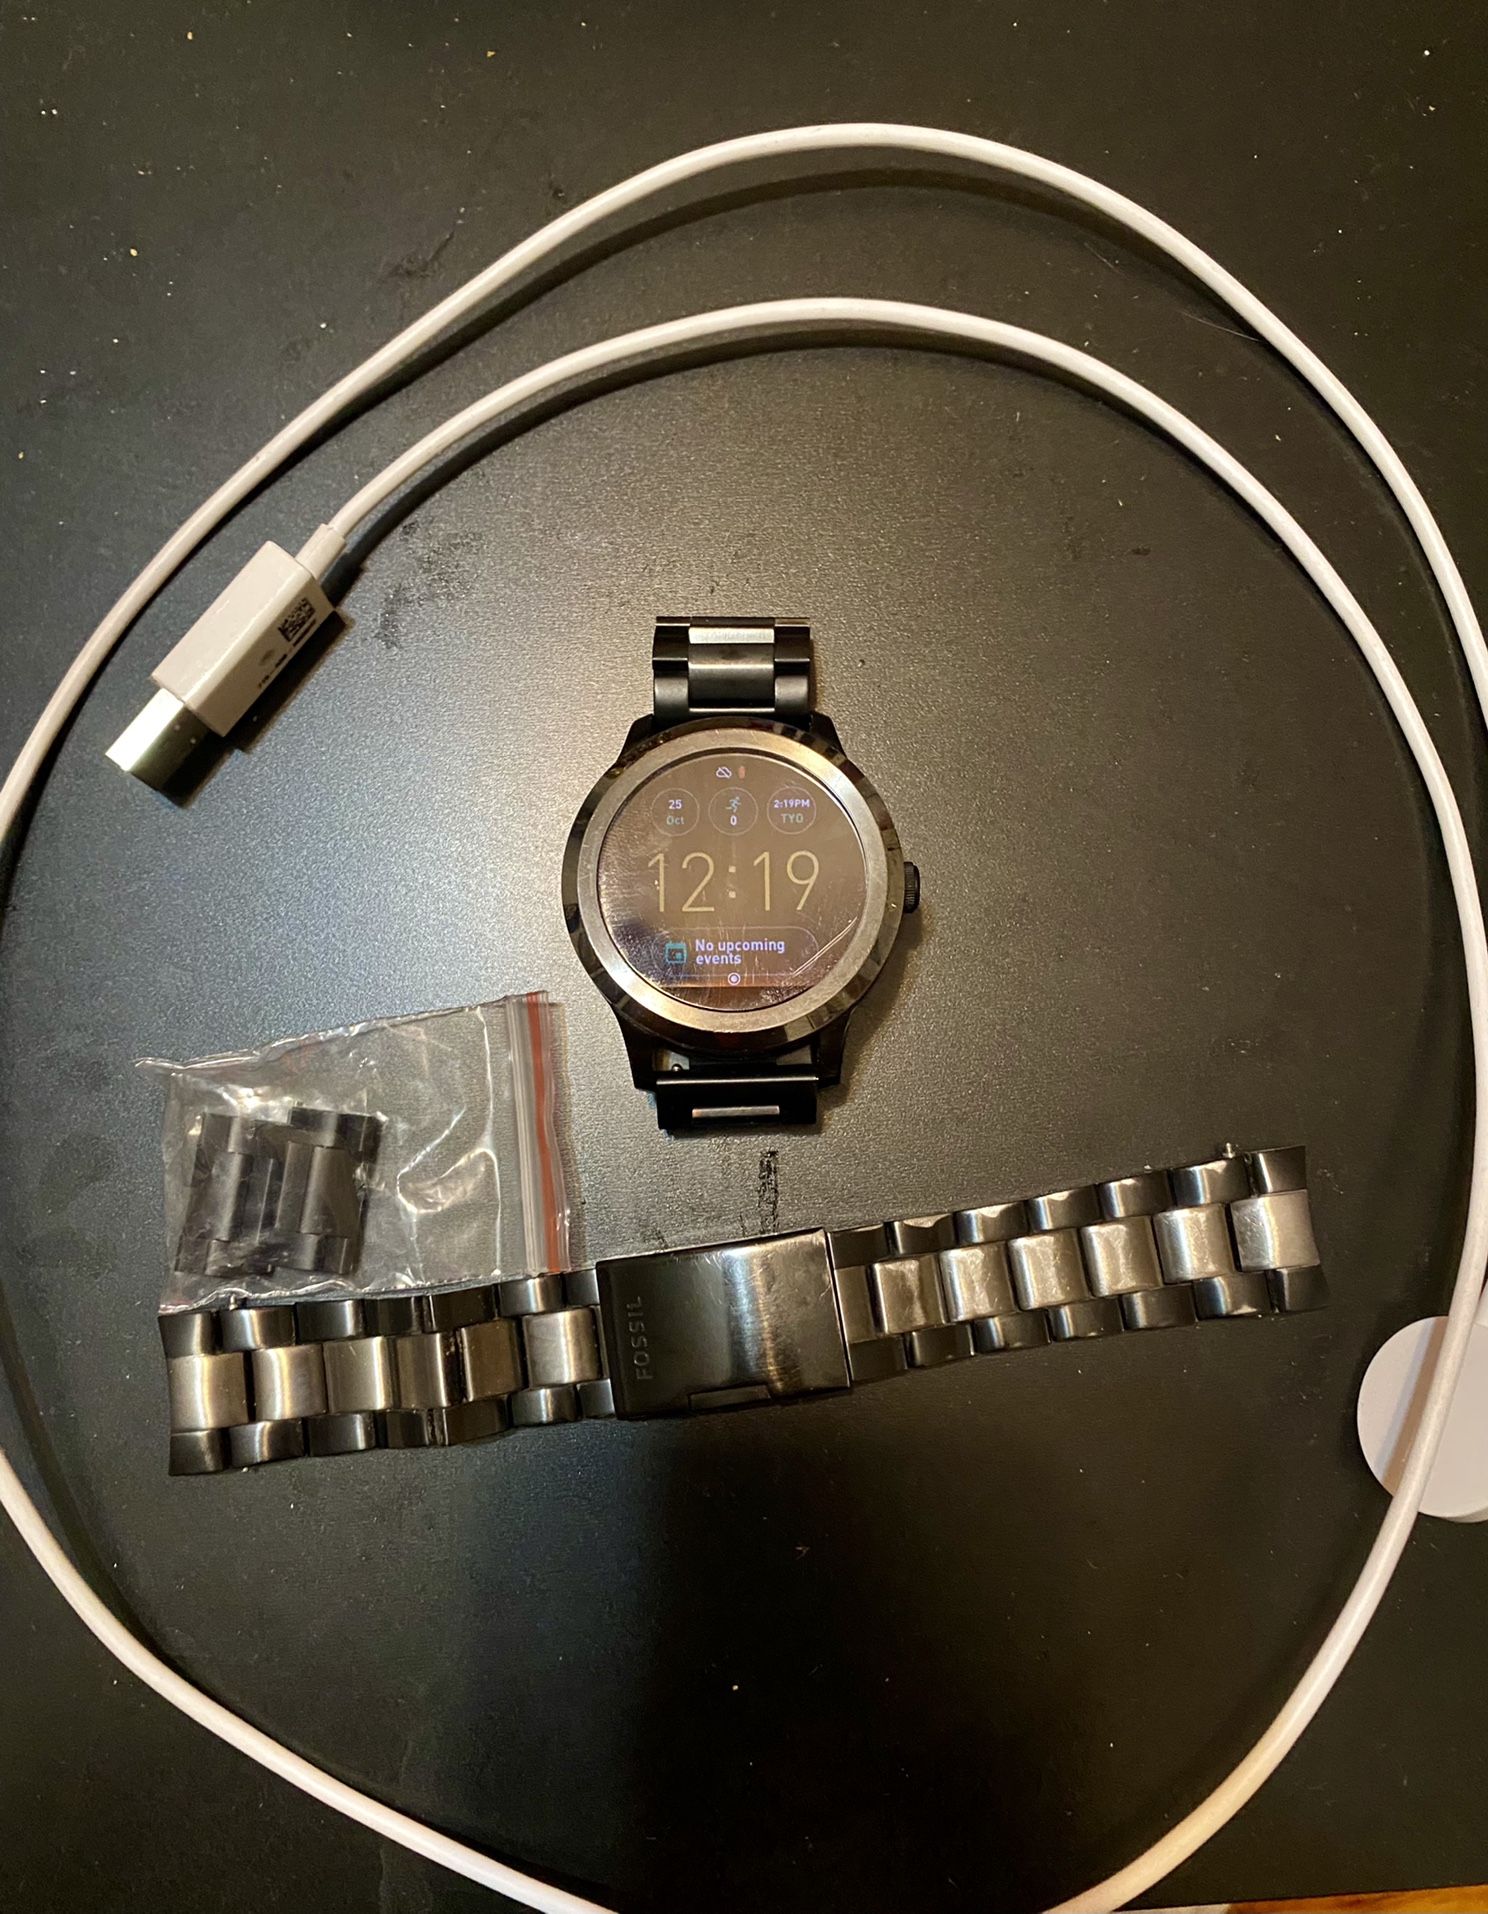 Fossil Founders 2.0 Smart Watch w/ Two Bands.